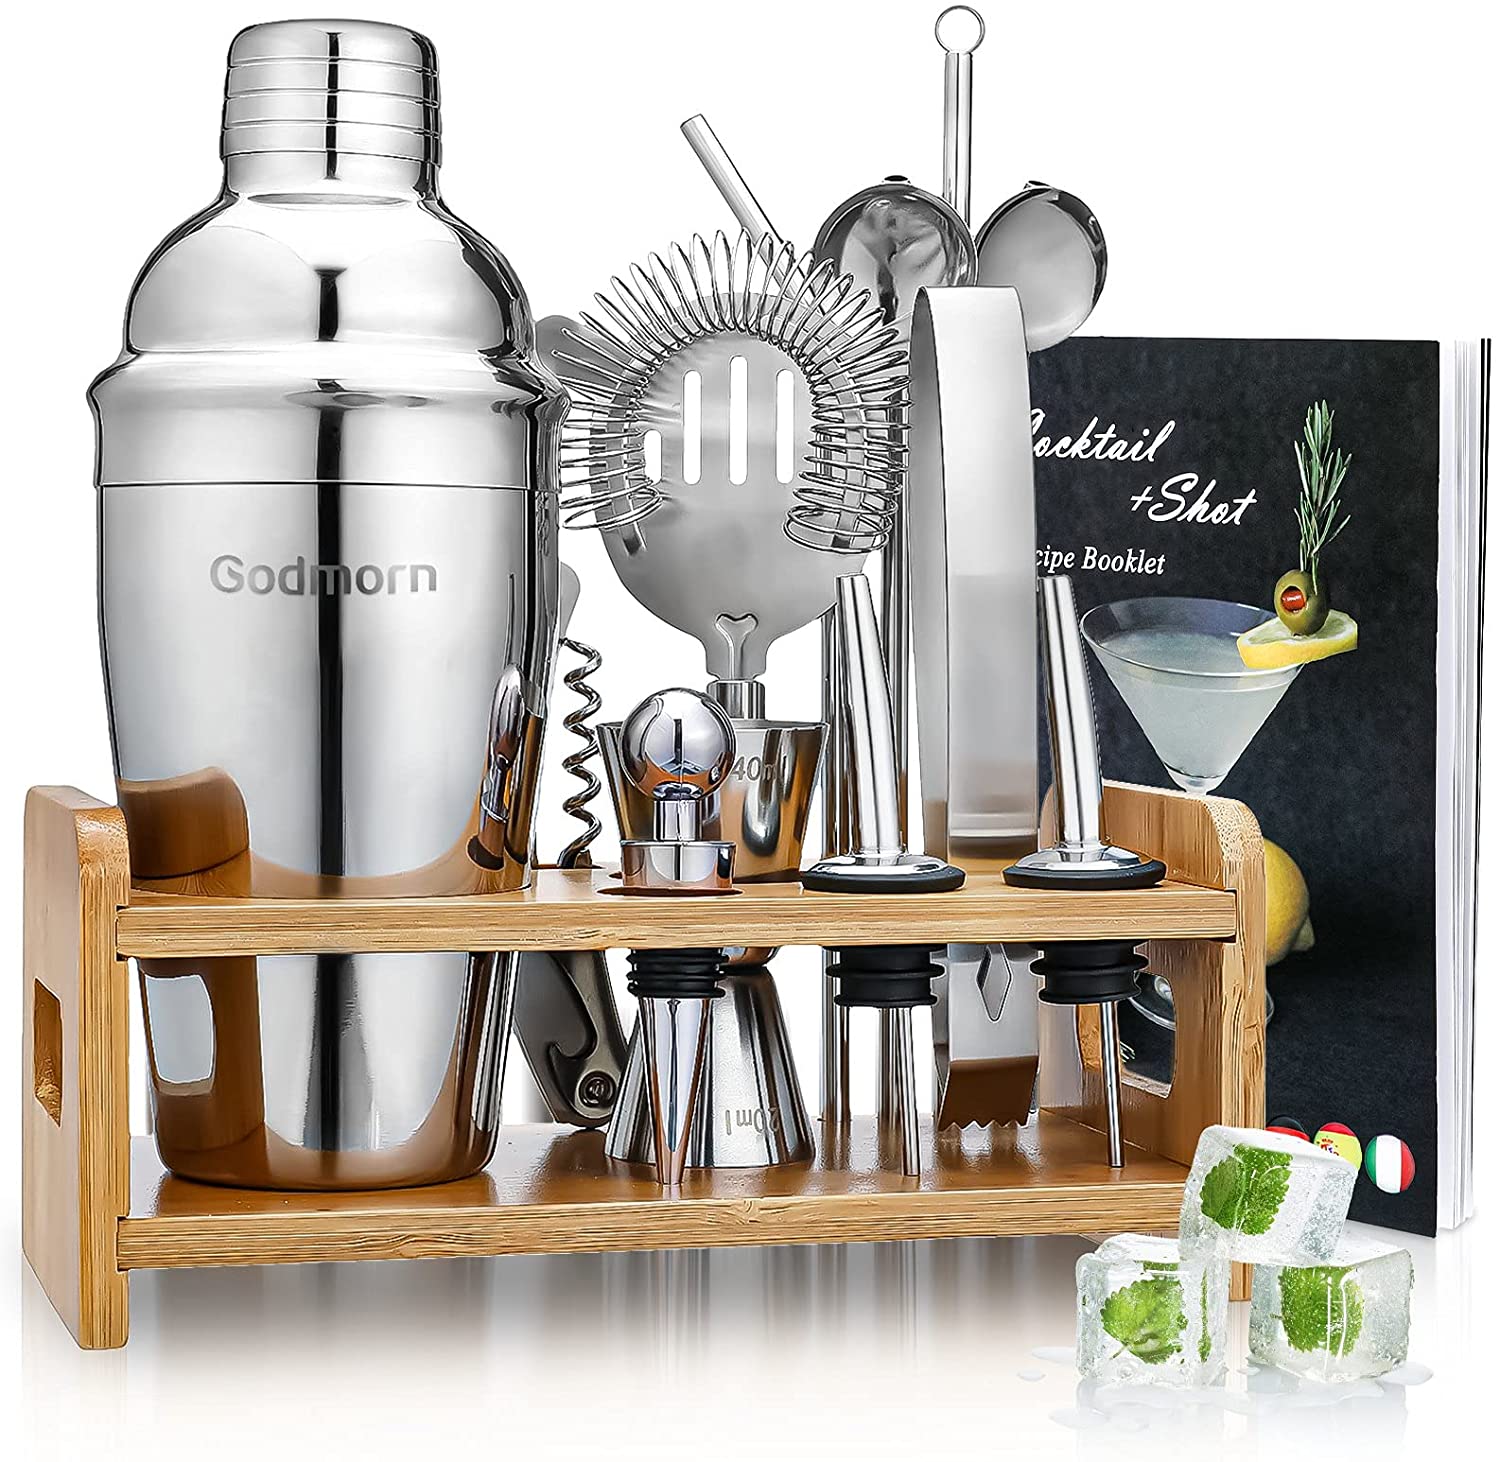 Cocktail Shaker Set with Display Stand and recipe book